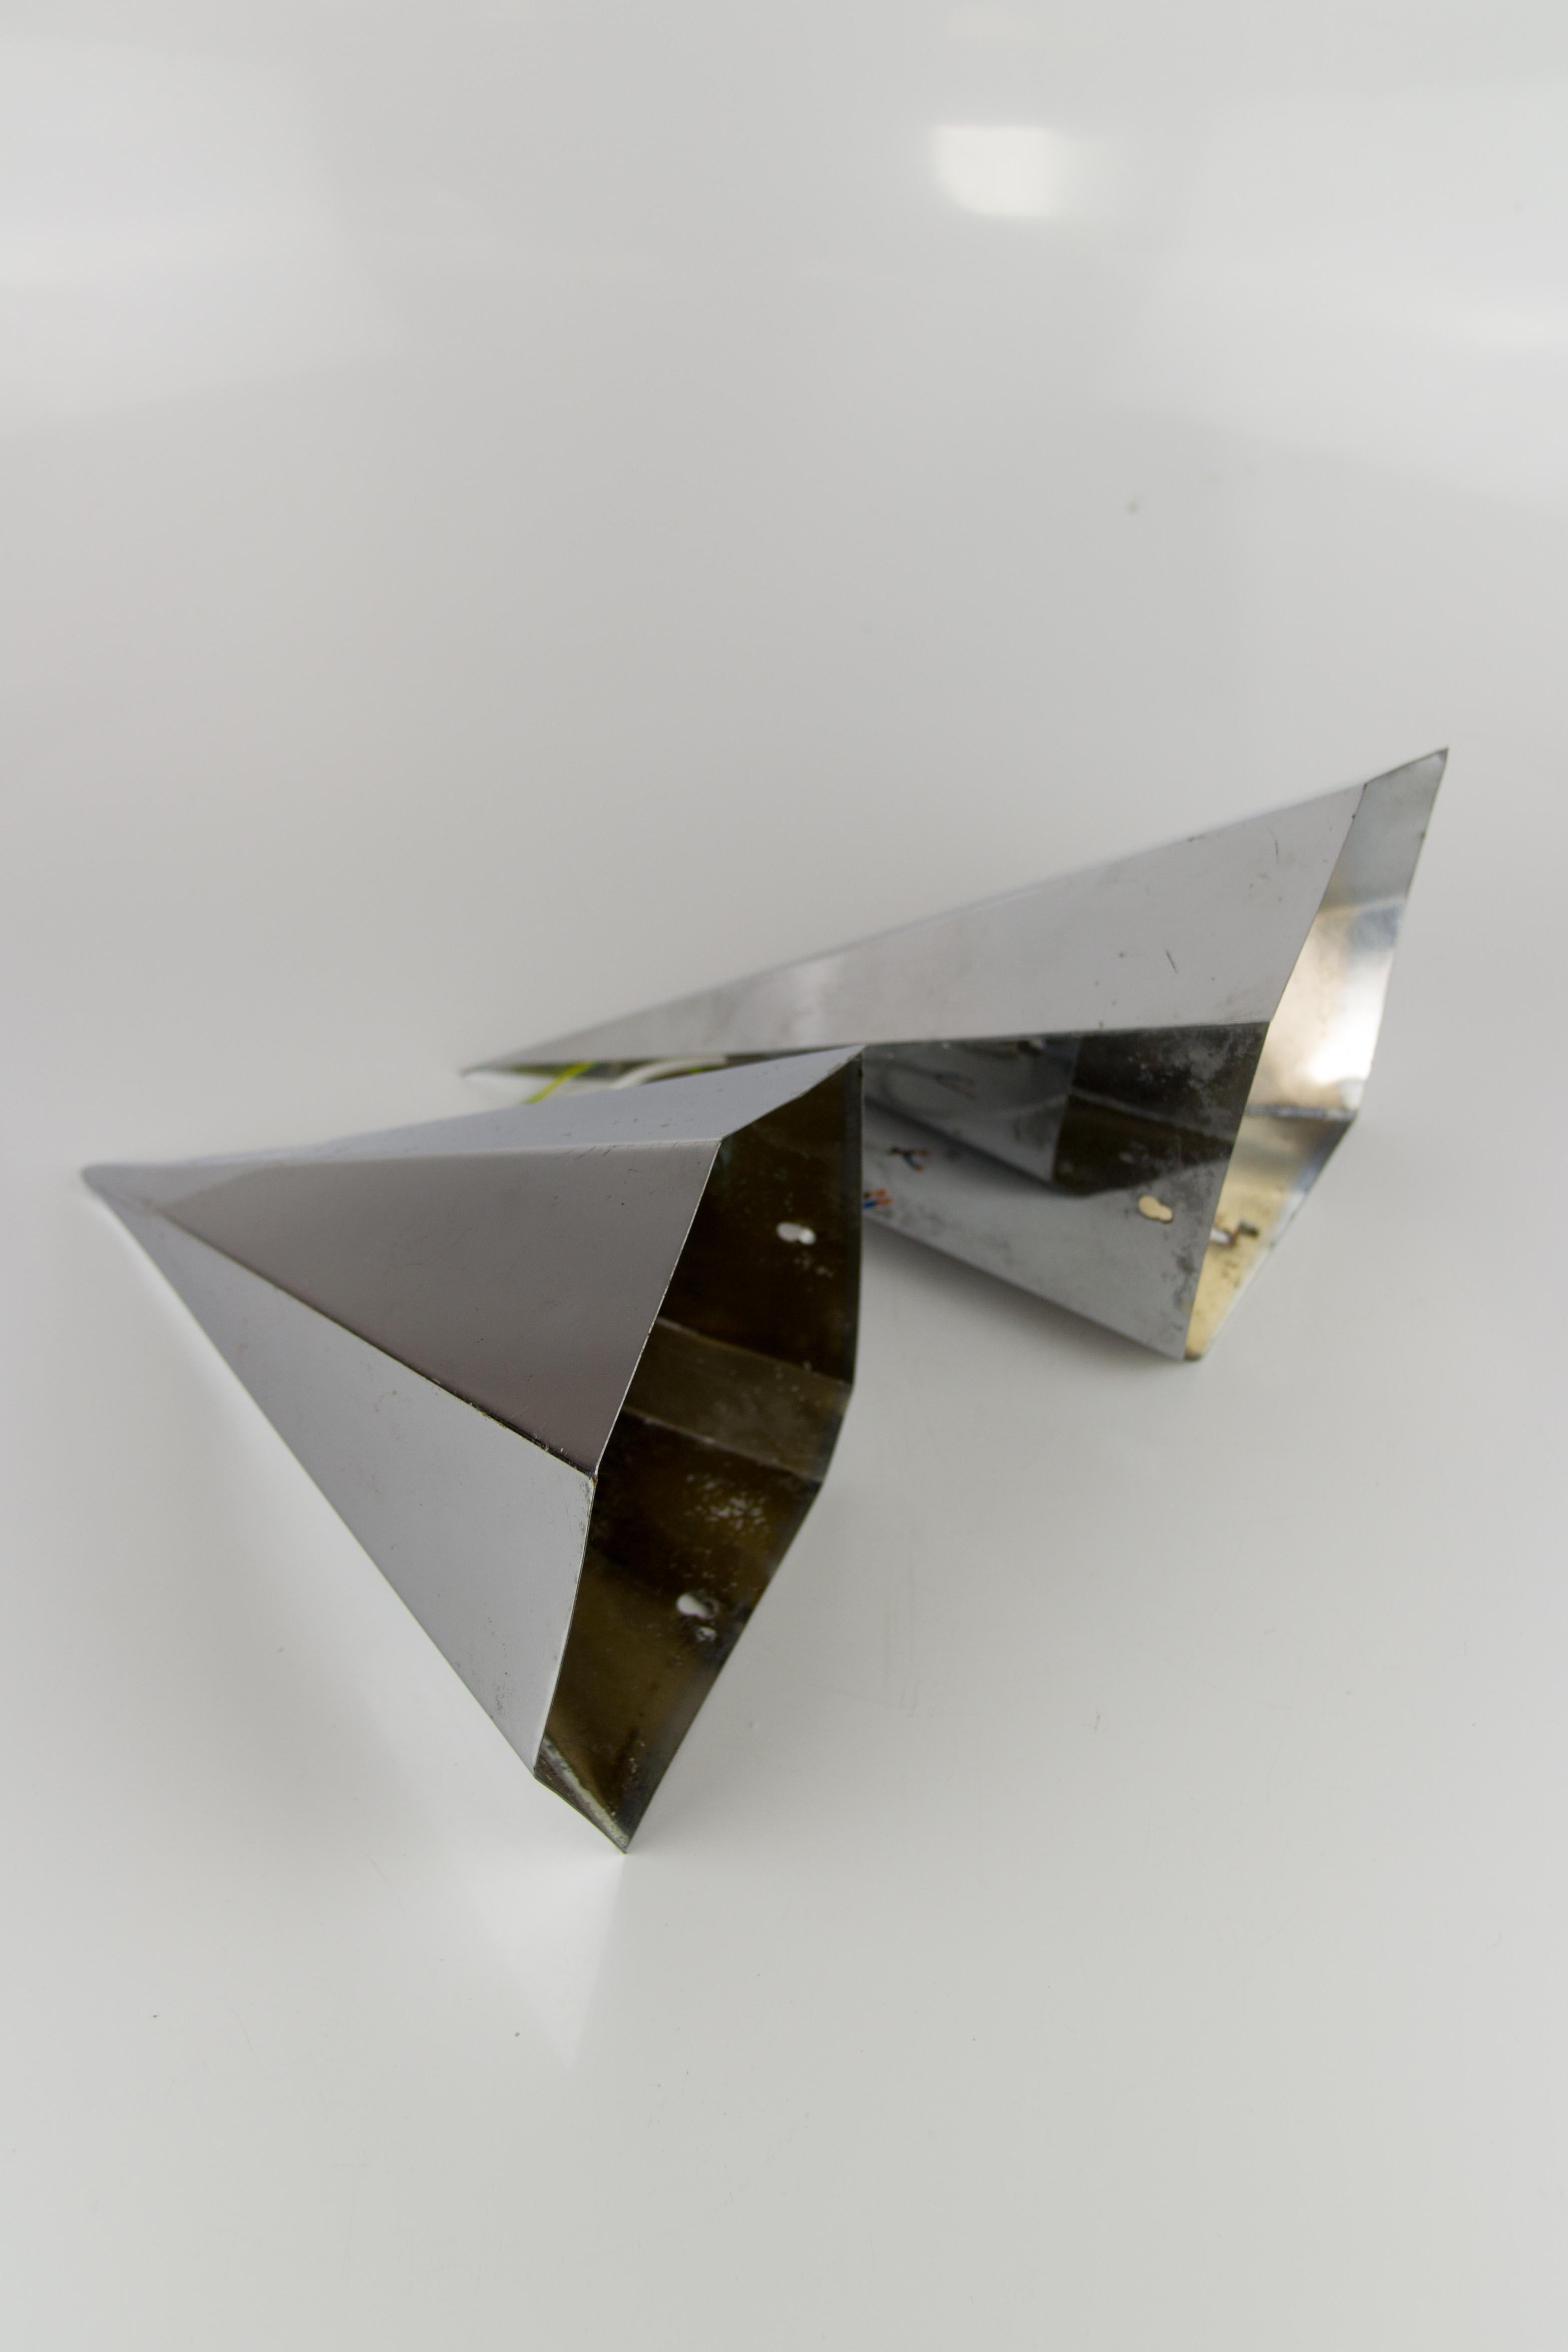 Pair of Art Deco Nickel-Plated Metal Prism Corner Wall Sconces, France, 1920s For Sale 8